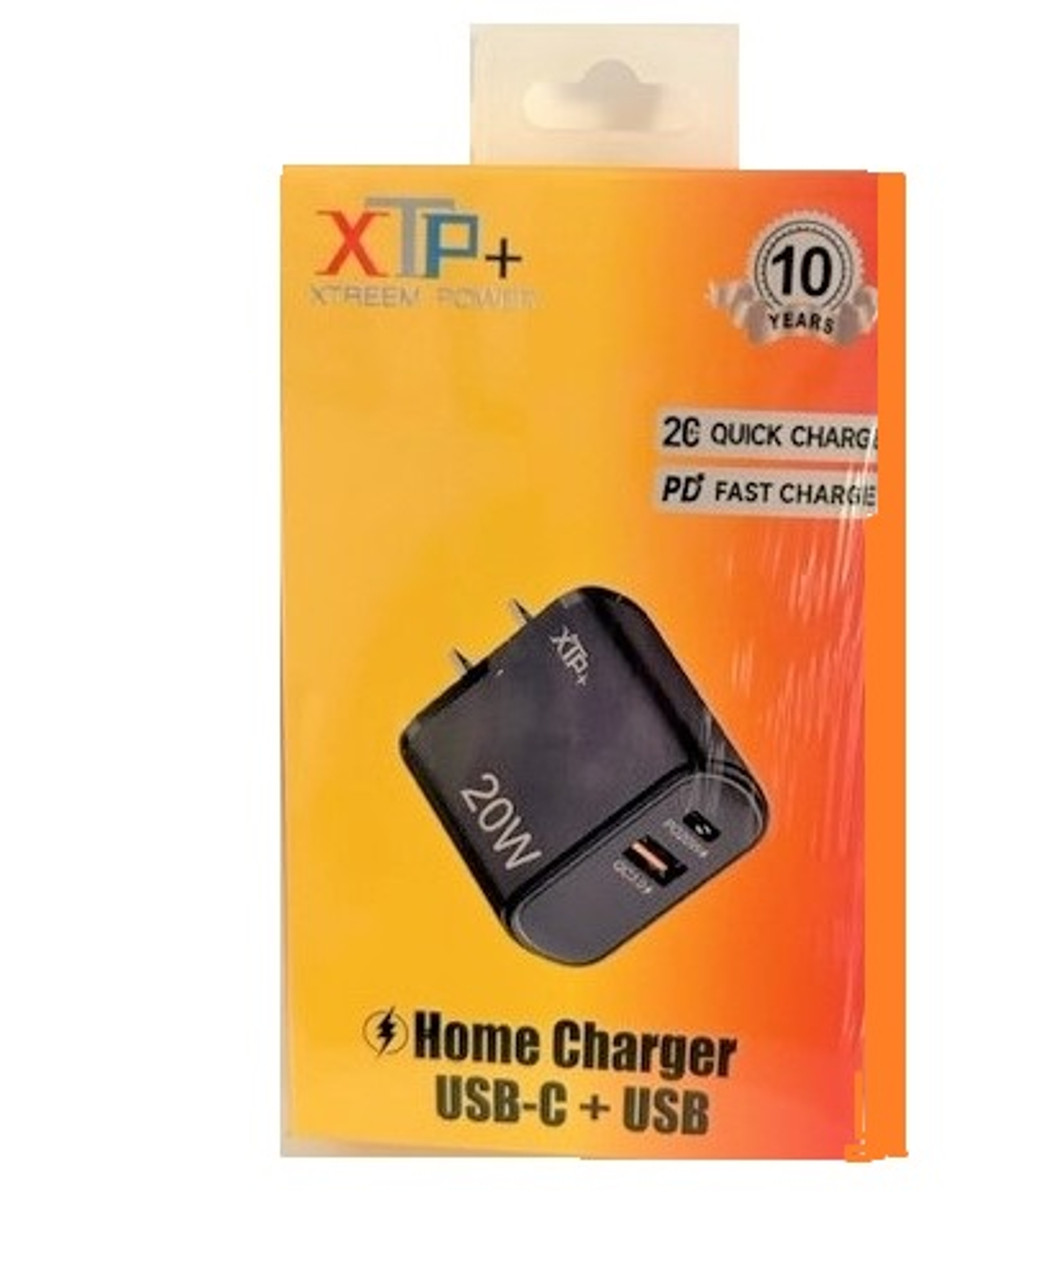 XTP Dual USB + C wall charger